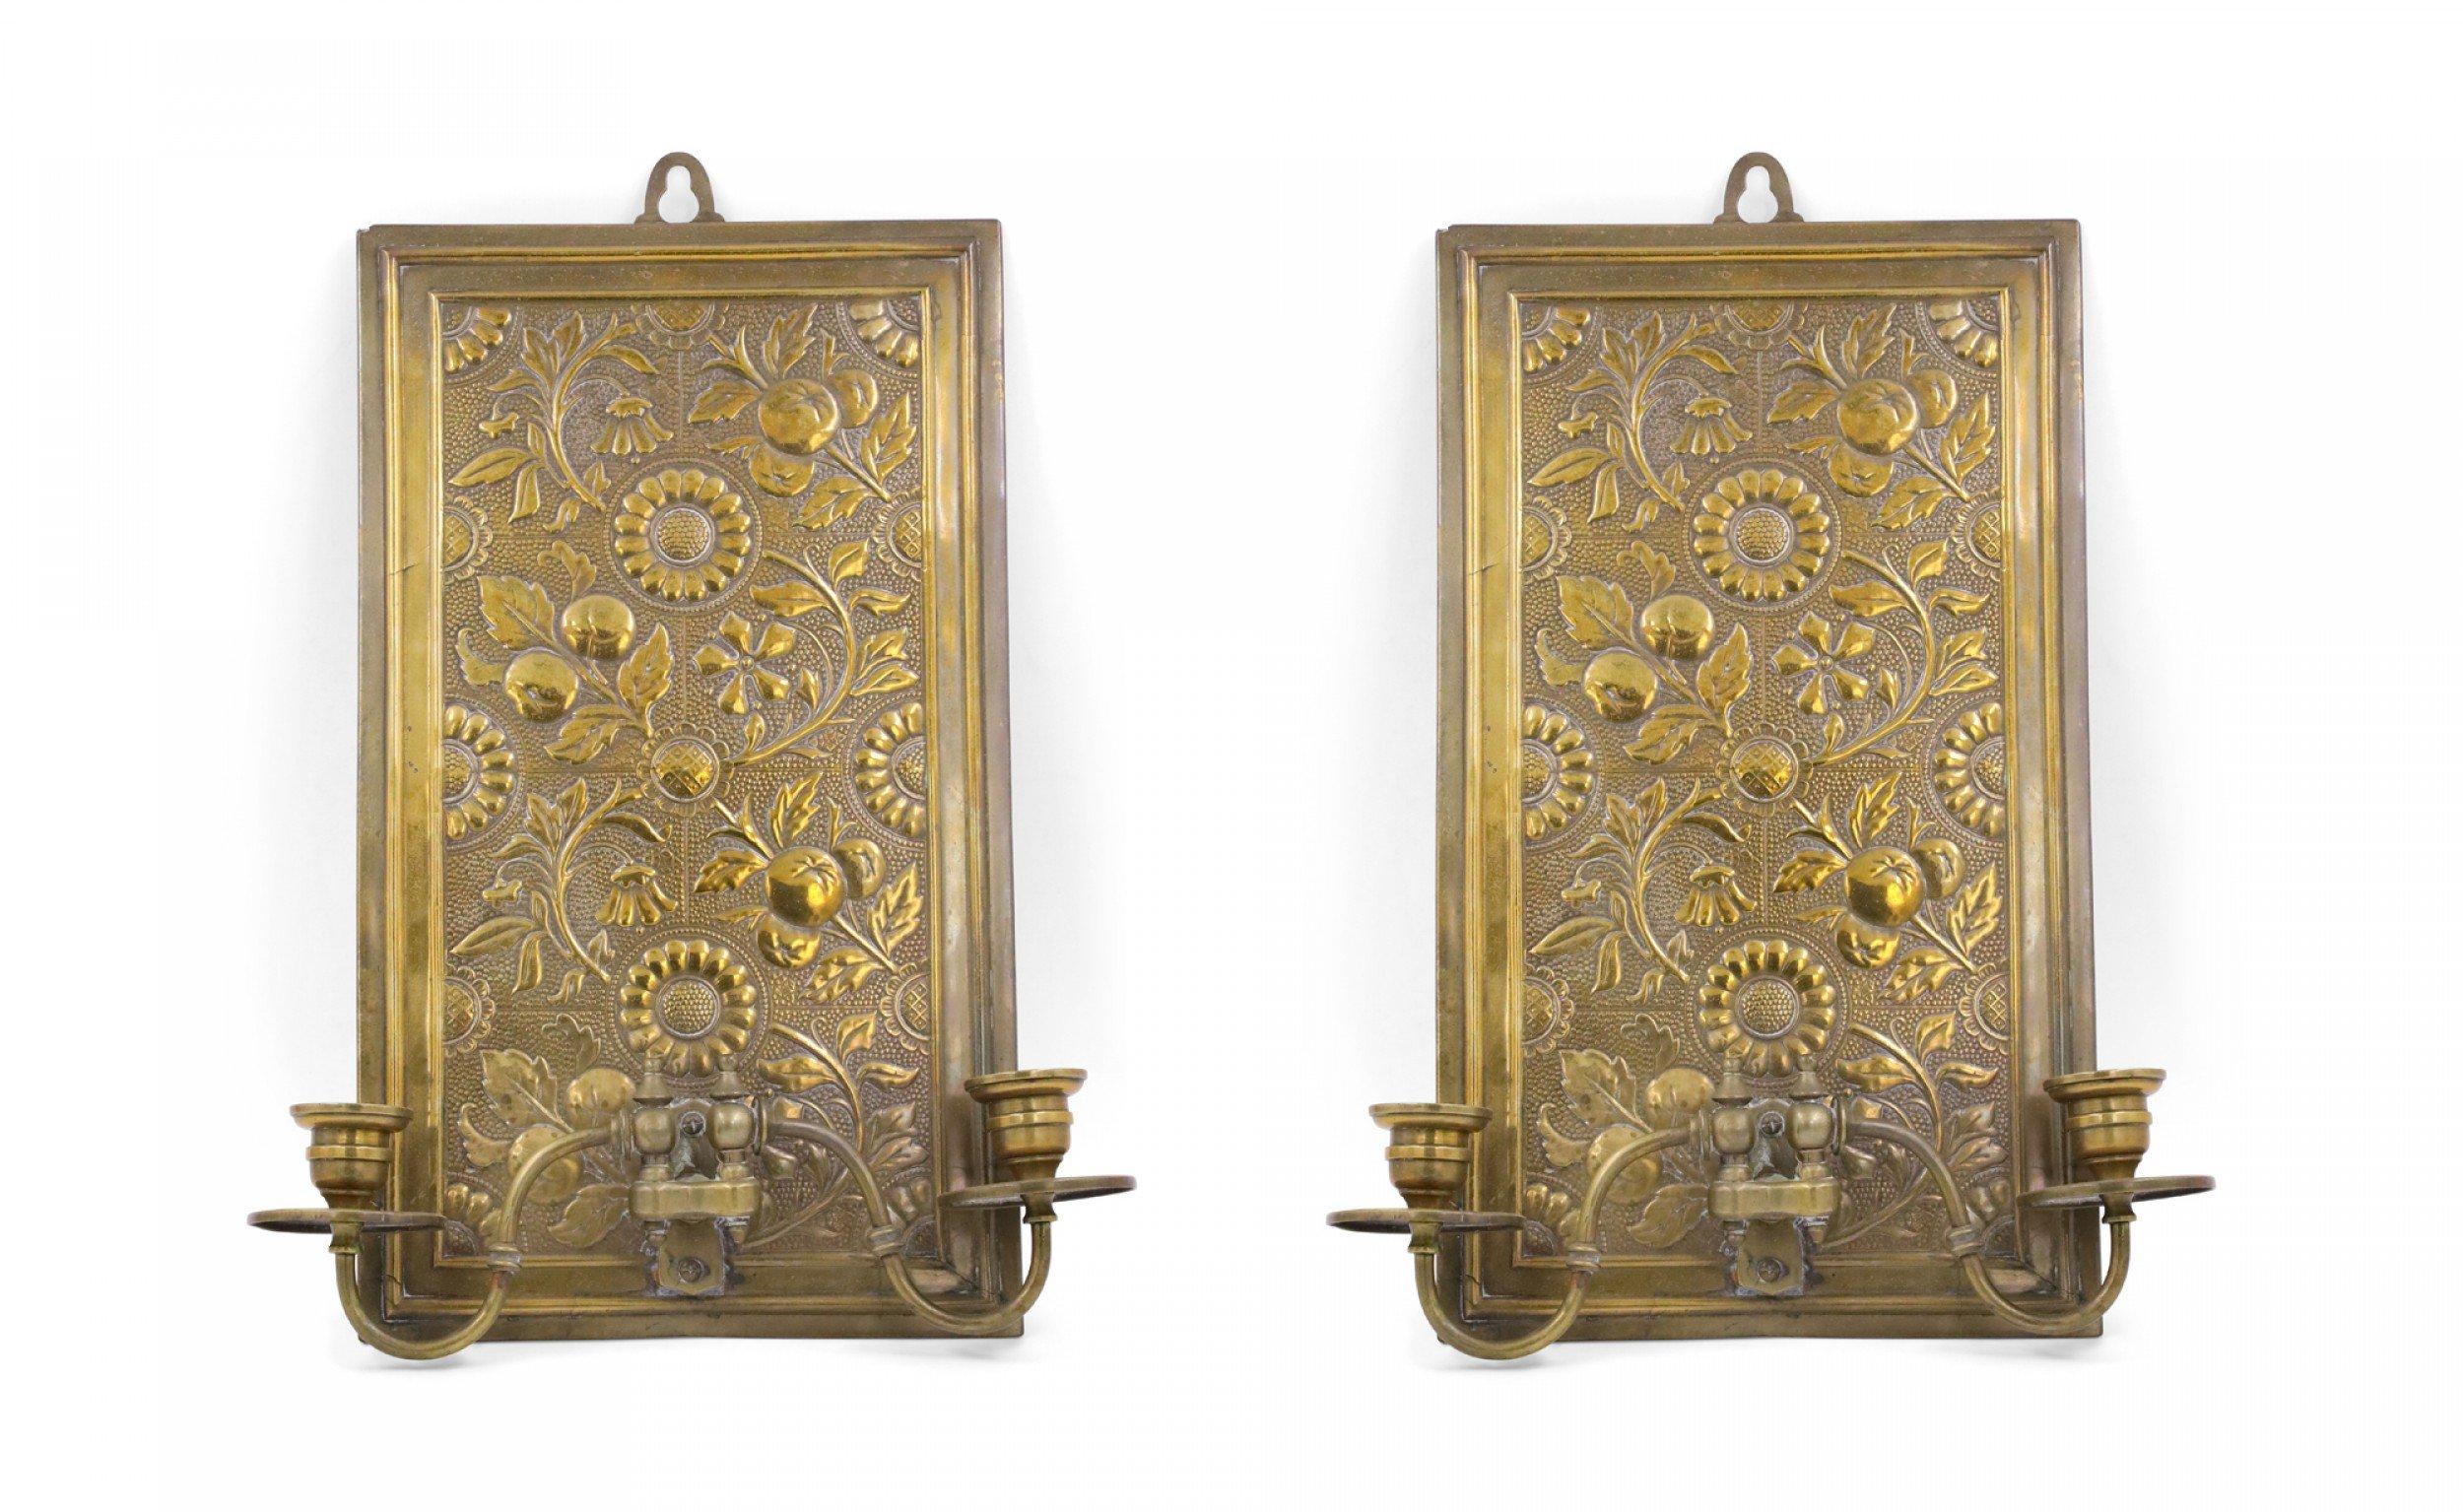 Pair of English Arts & Crafts (Aesthetic Movement) embossed brass wall sconces with two swivel scroll arms and rectangular floral design back plates (Priced as pair).
  